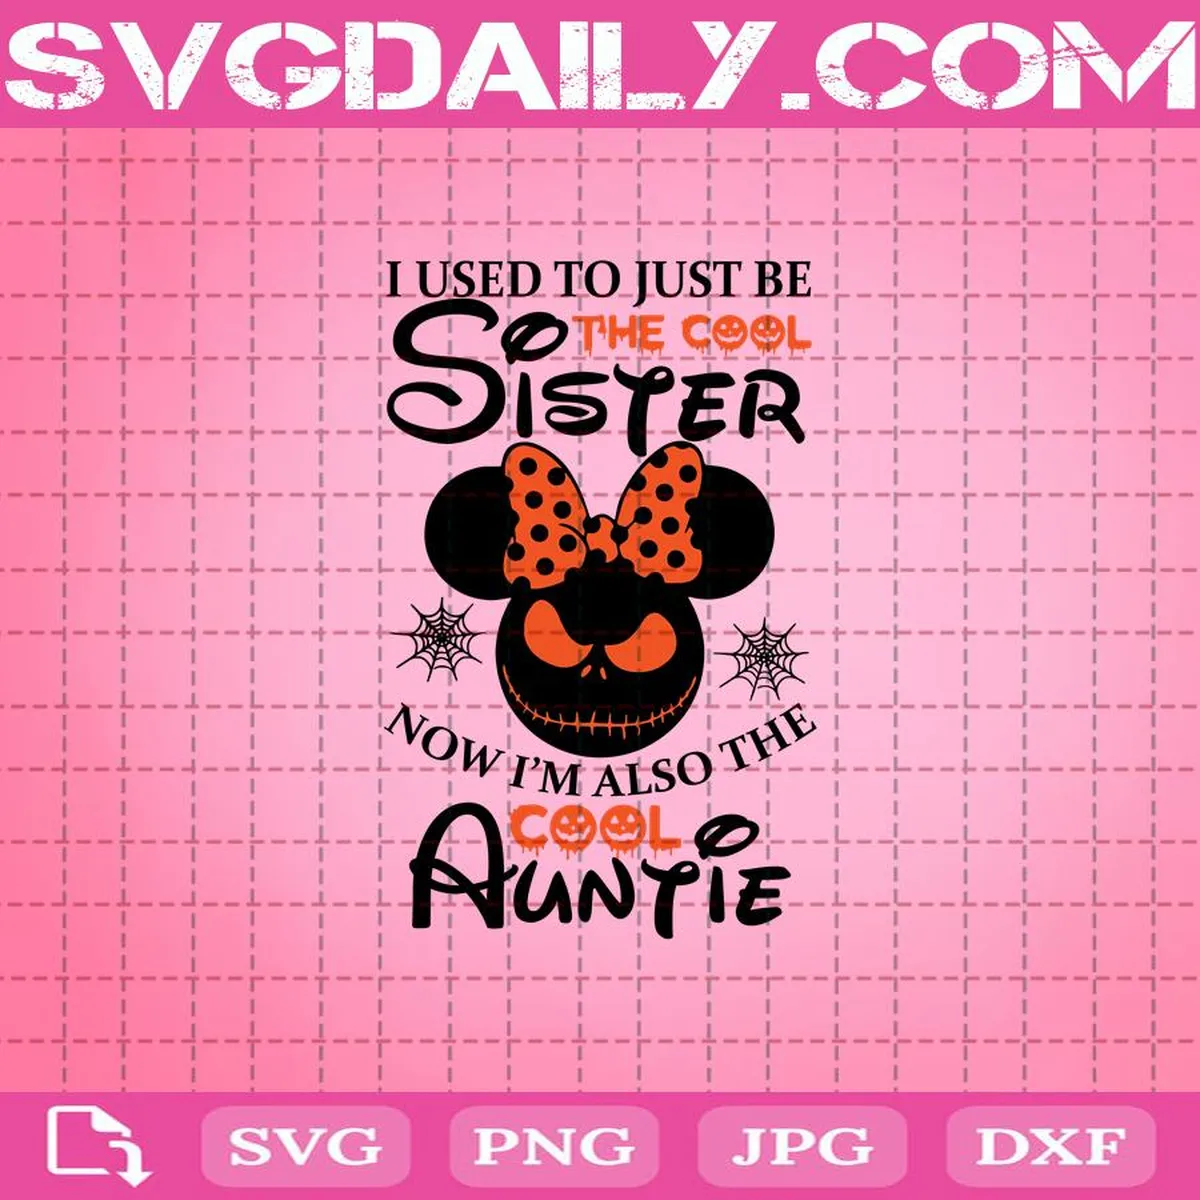 I Used To Just Be The Cool Sister Now I’m Also The Cool Auntie Svg, Mickey Halloween Svg, Disney Svg, Instant Download